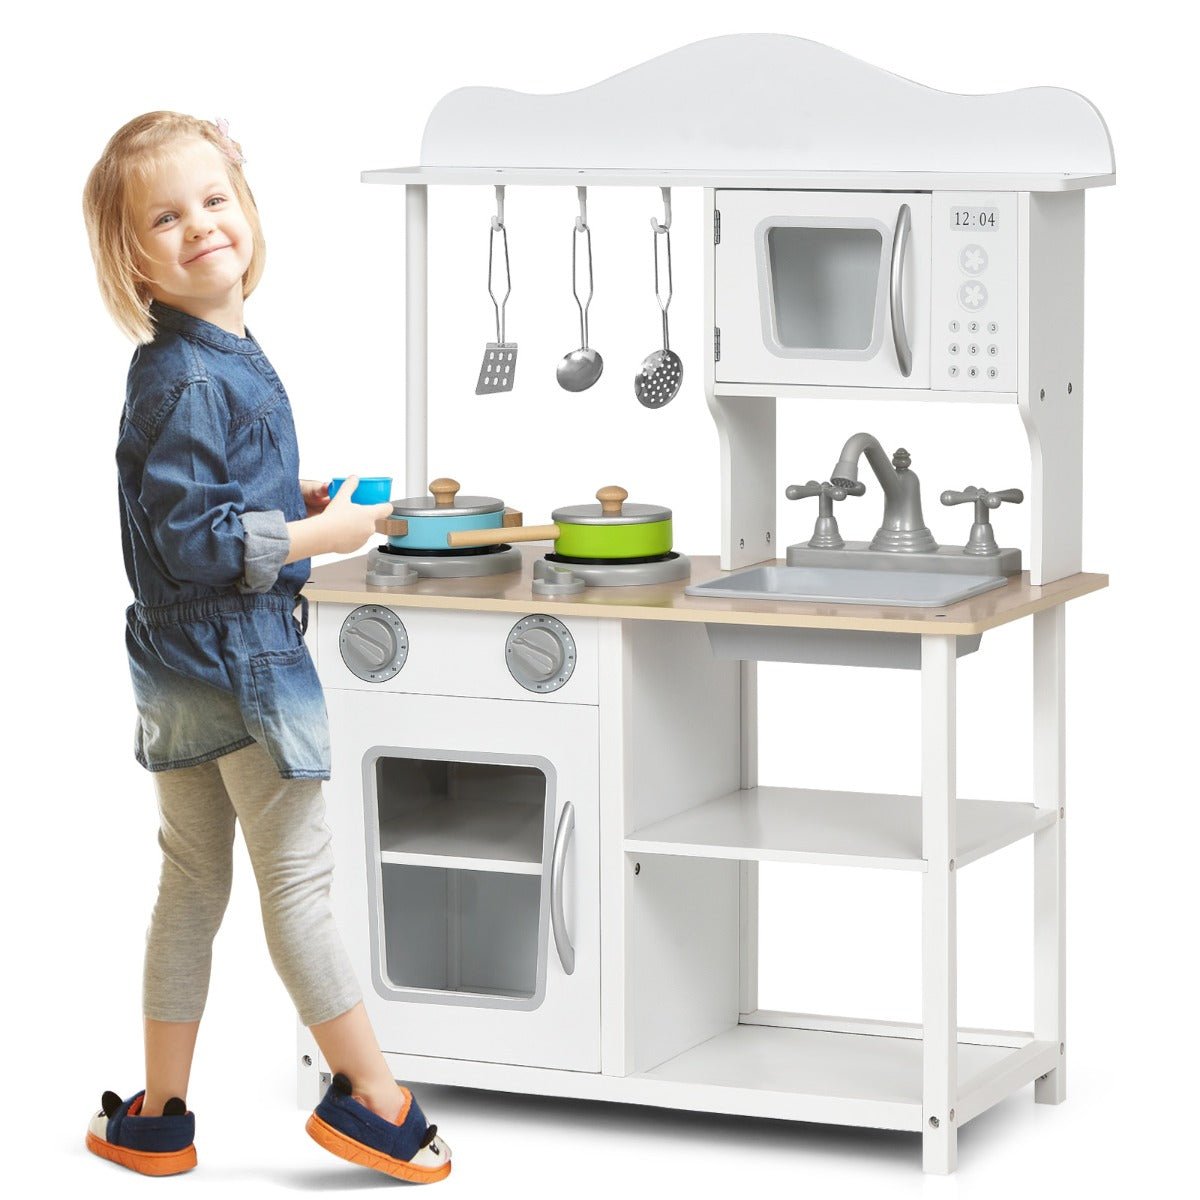 Play and Educate: Educational Kids Play Kitchen with Cooking Pretend Set